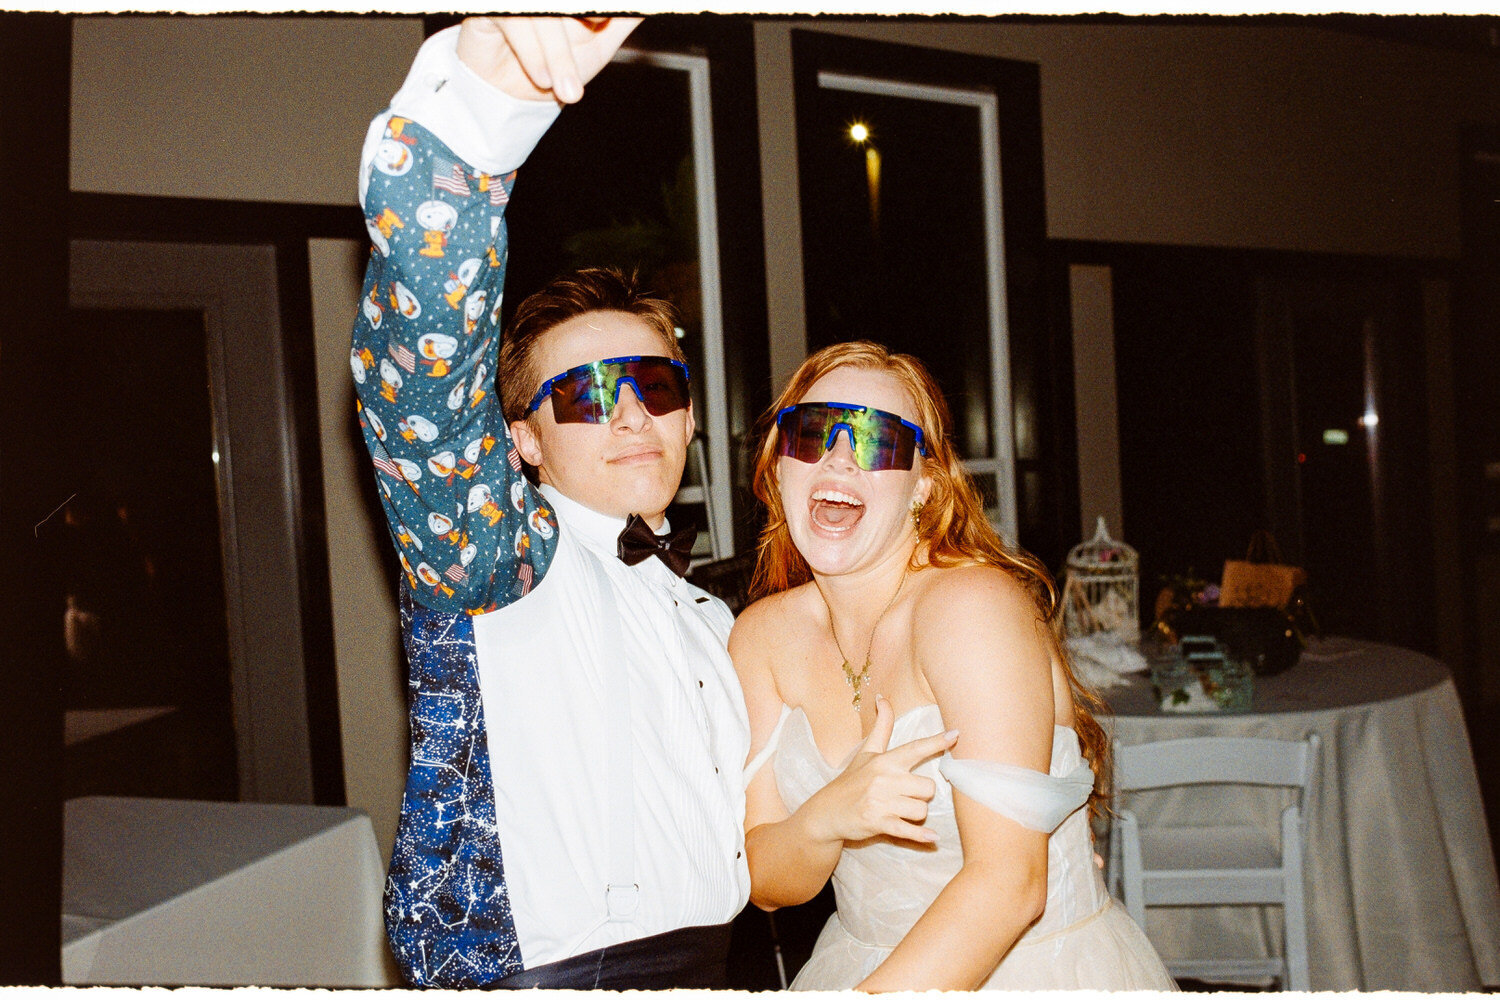 Bride and groom, wearing sunglasses, laugh at the camera while on the dance floor